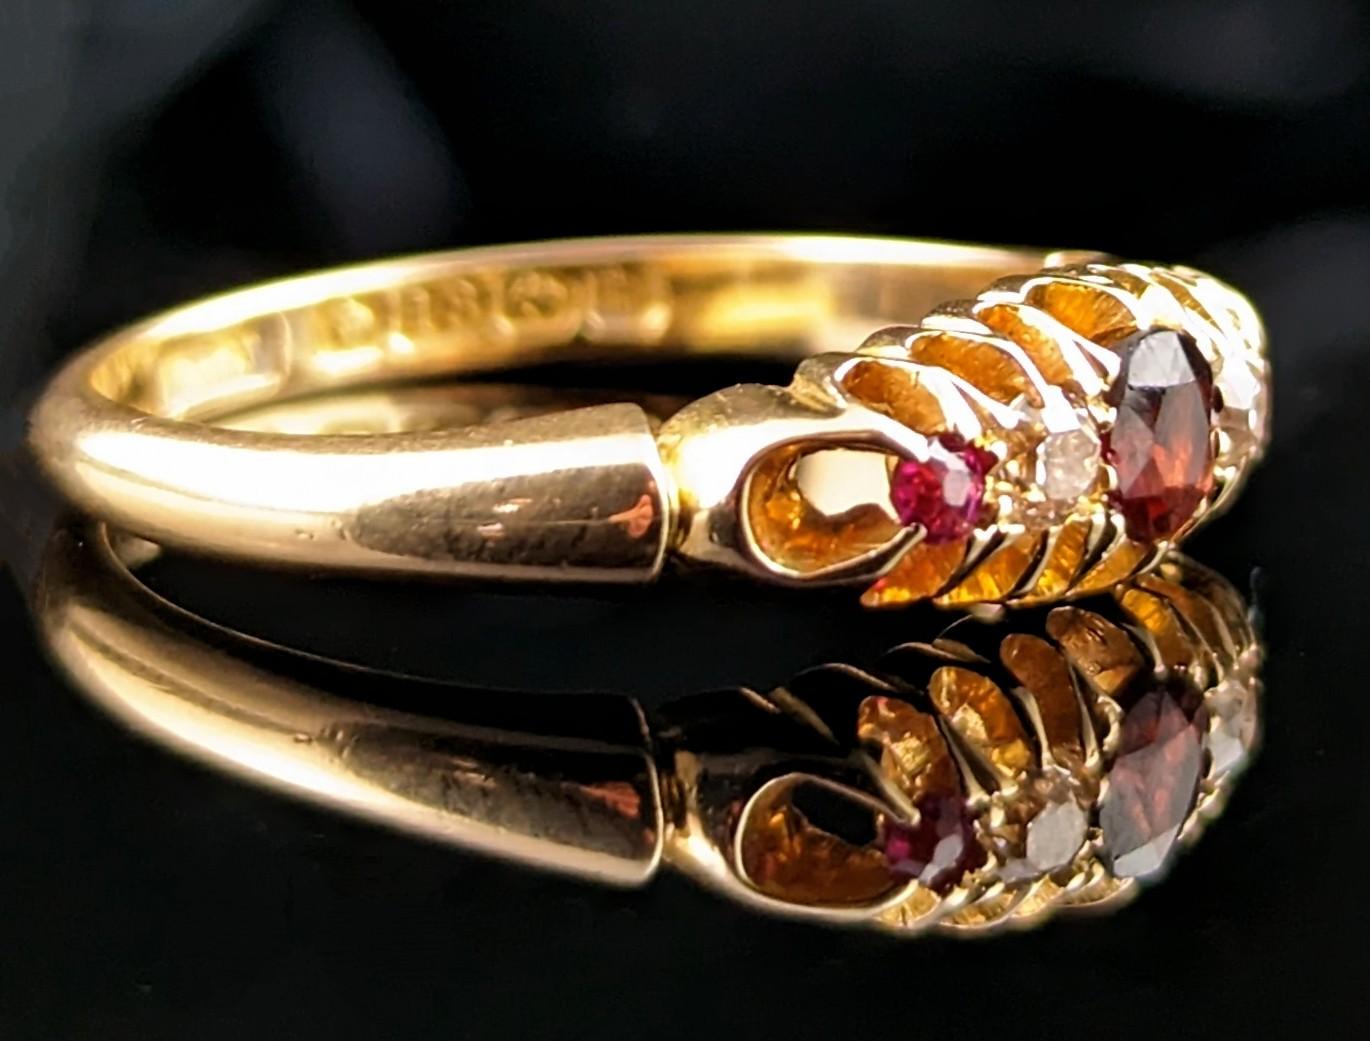 Antique Garnet, Ruby and Diamond Ring, 18ct Gold 1